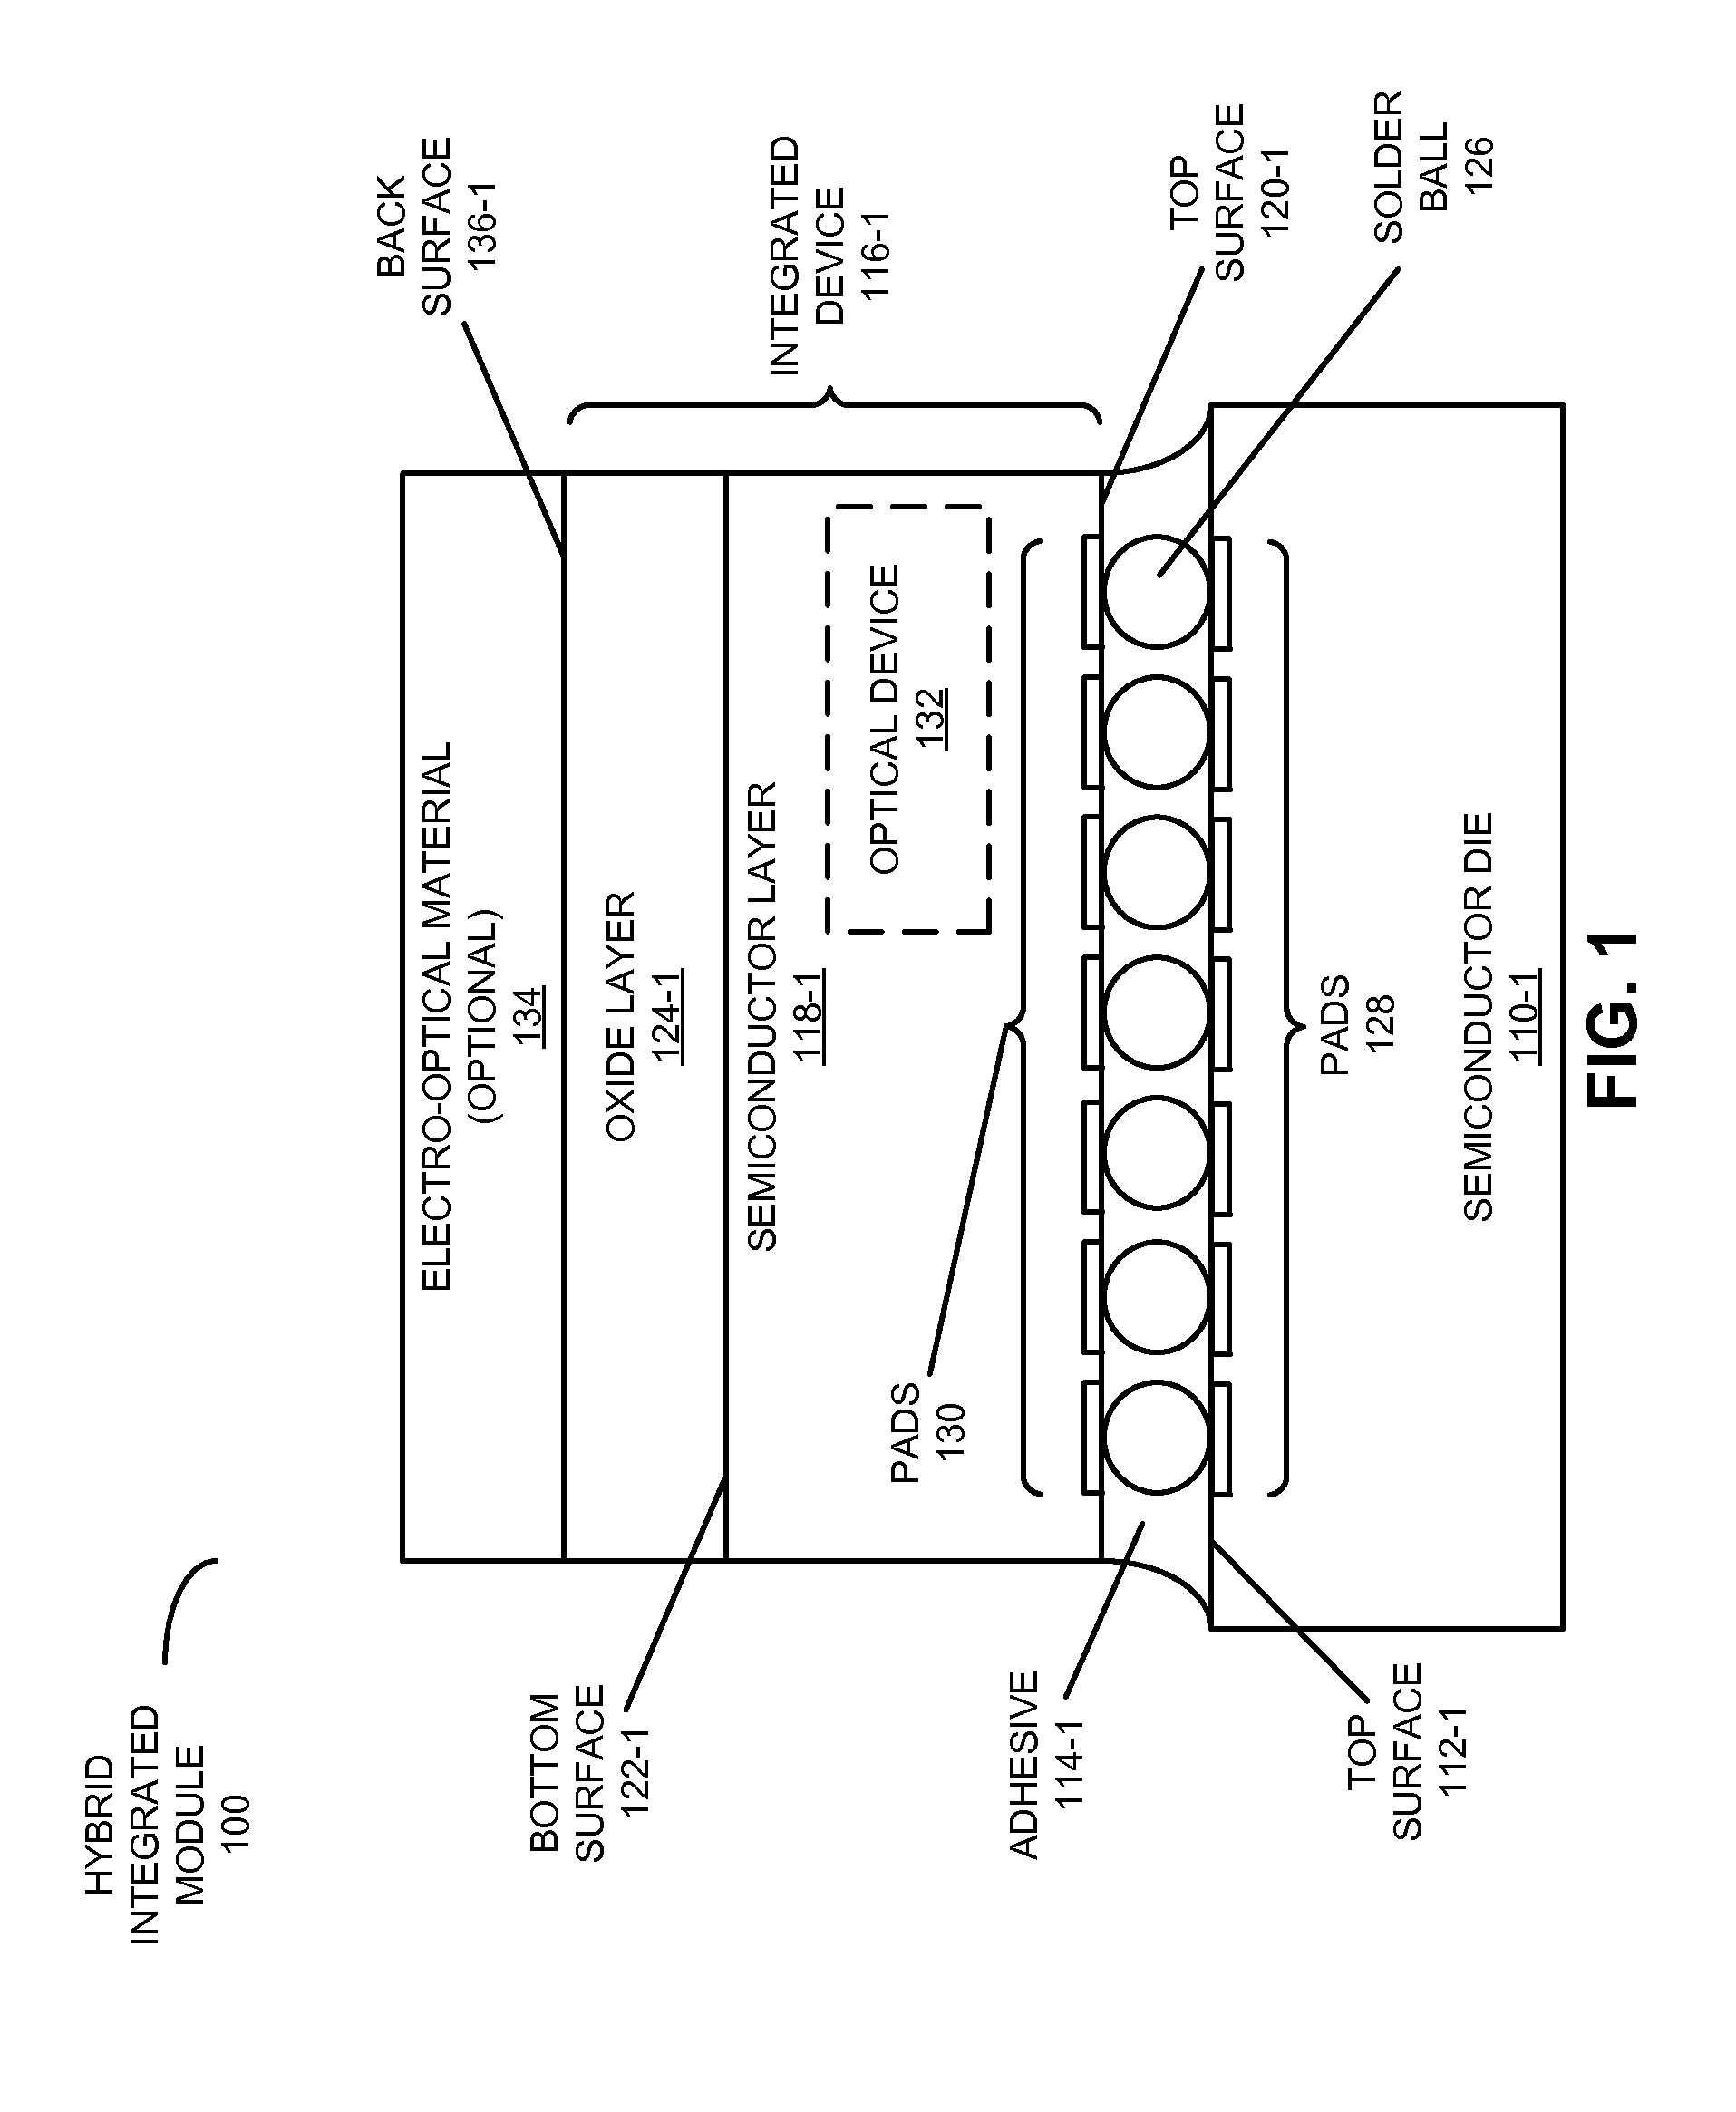 Hybrid substrateless device with enhanced tuning efficiency